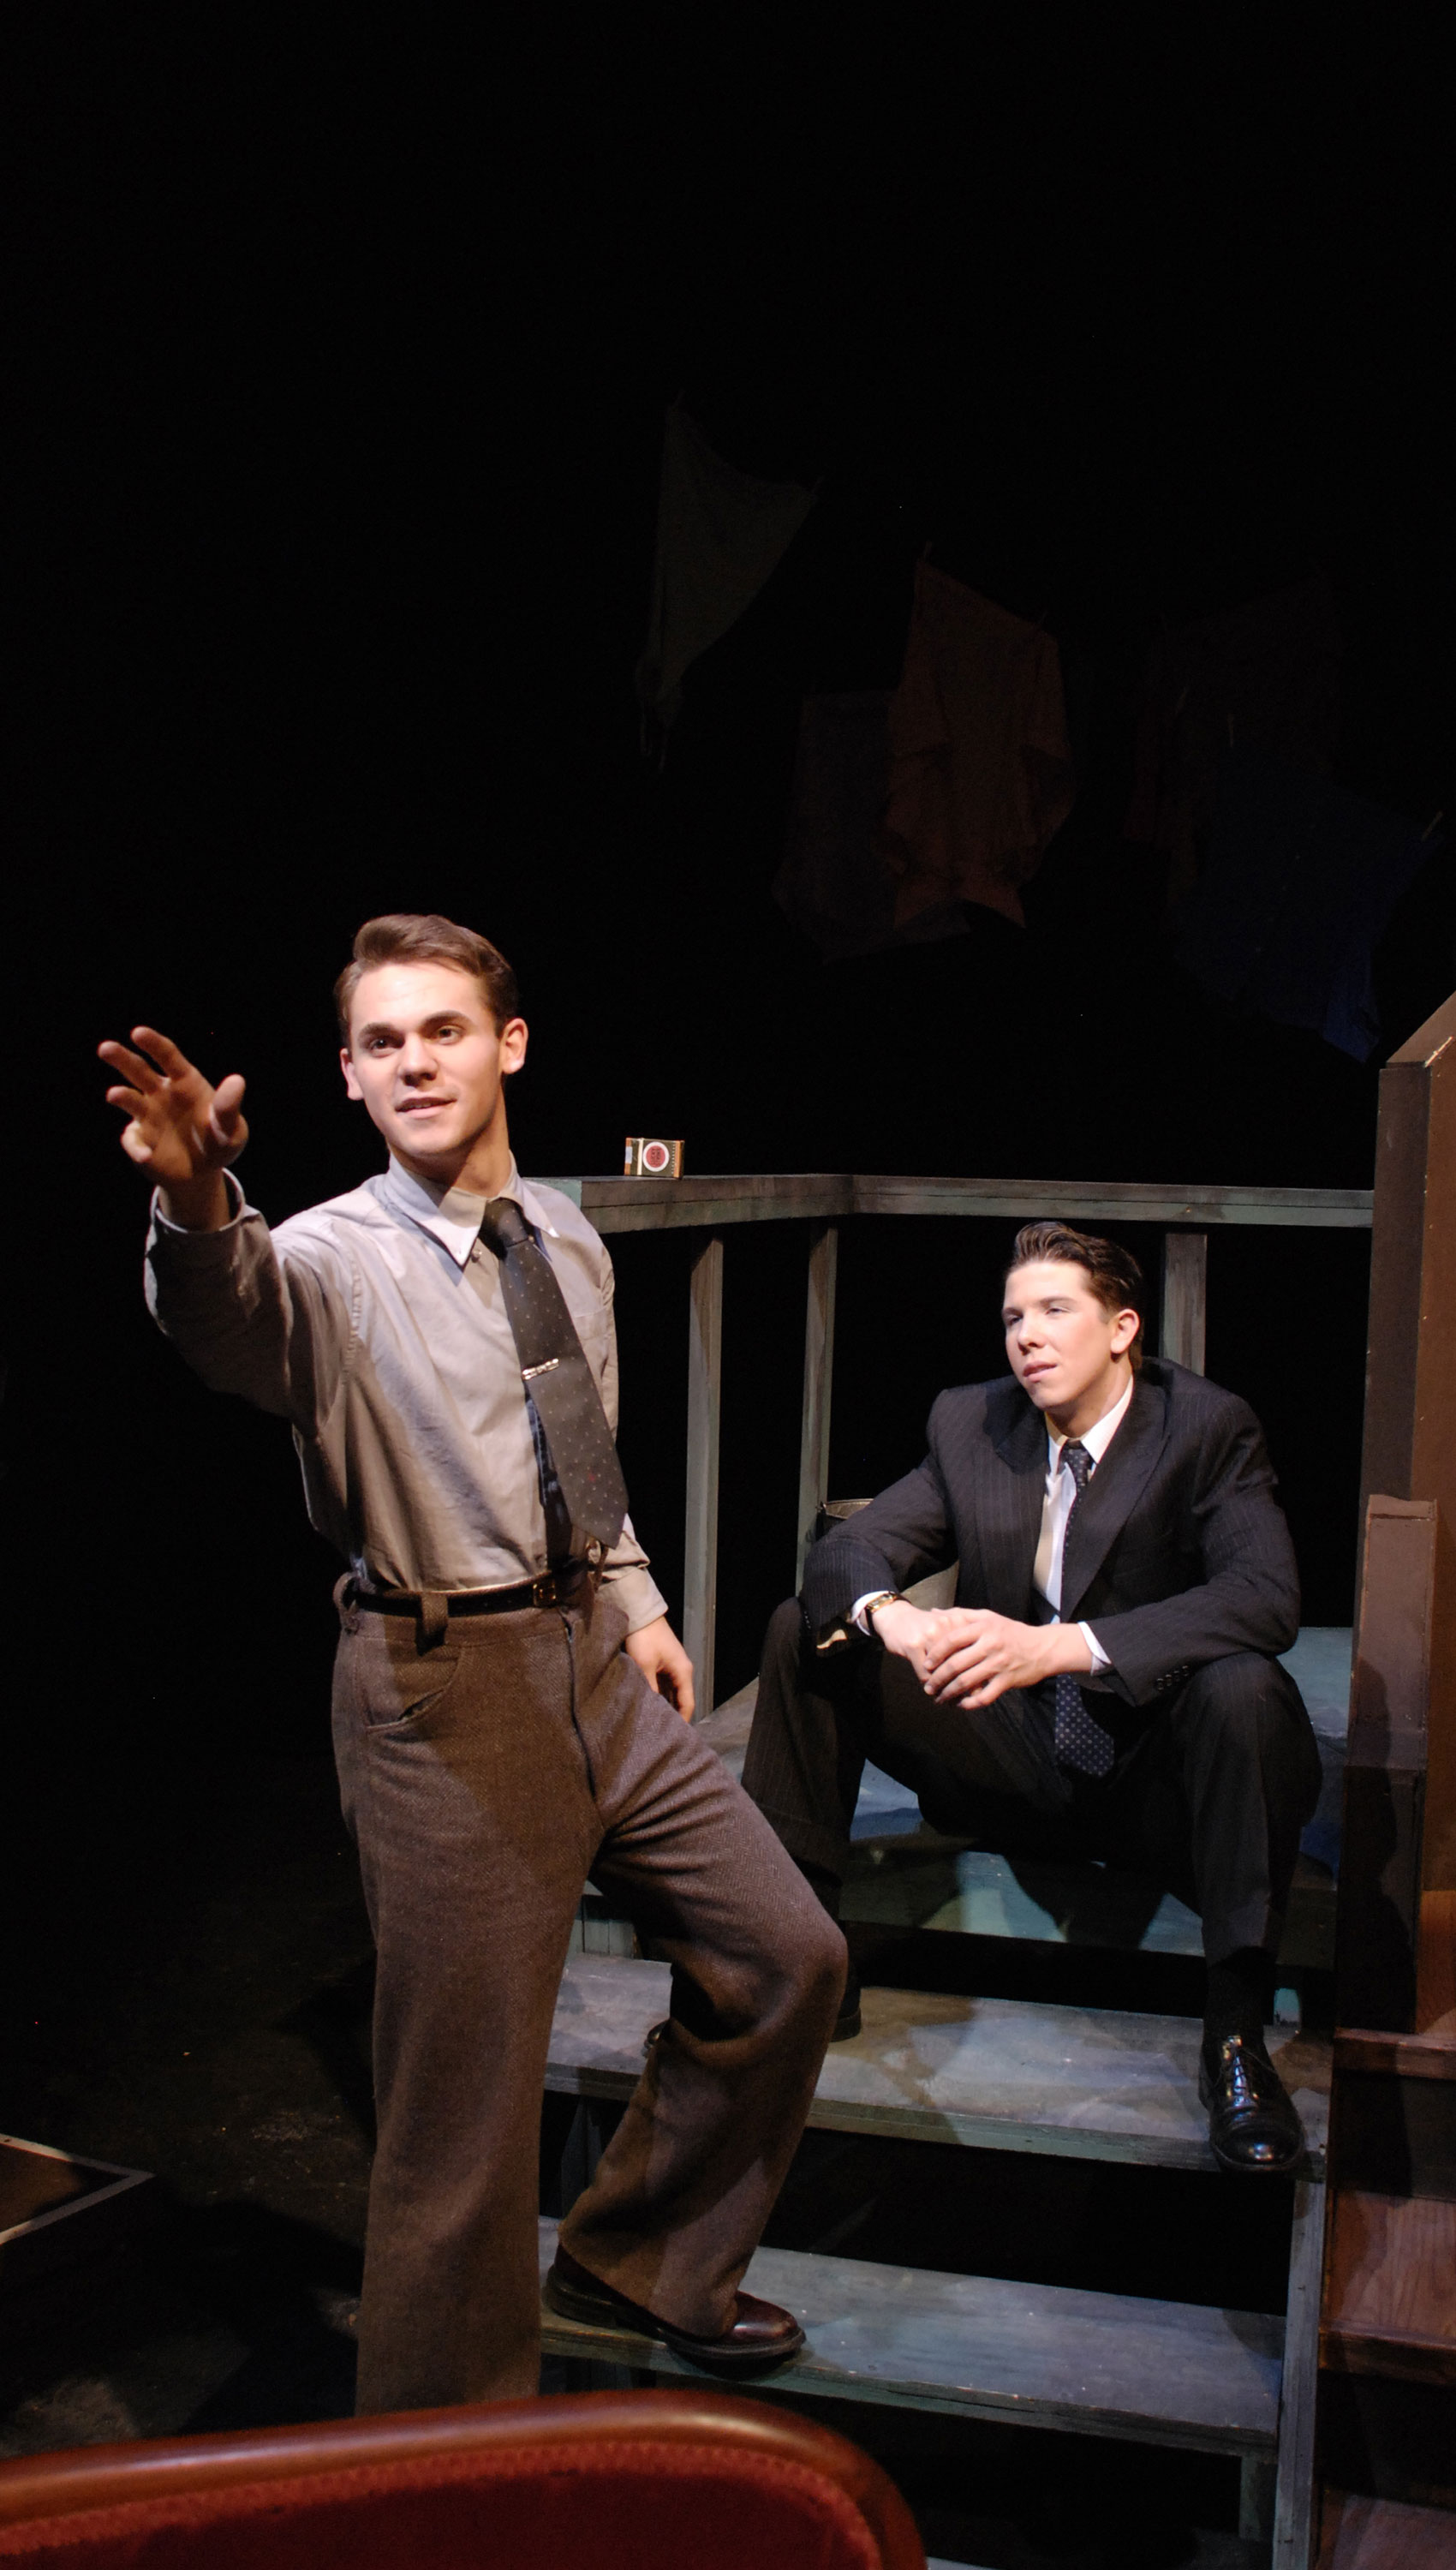 A young man stands, one foot on a porch step as he points out toward the audience, which he is facing, with his hand outstretched while another young man sits on a doorstep watching the first young man.